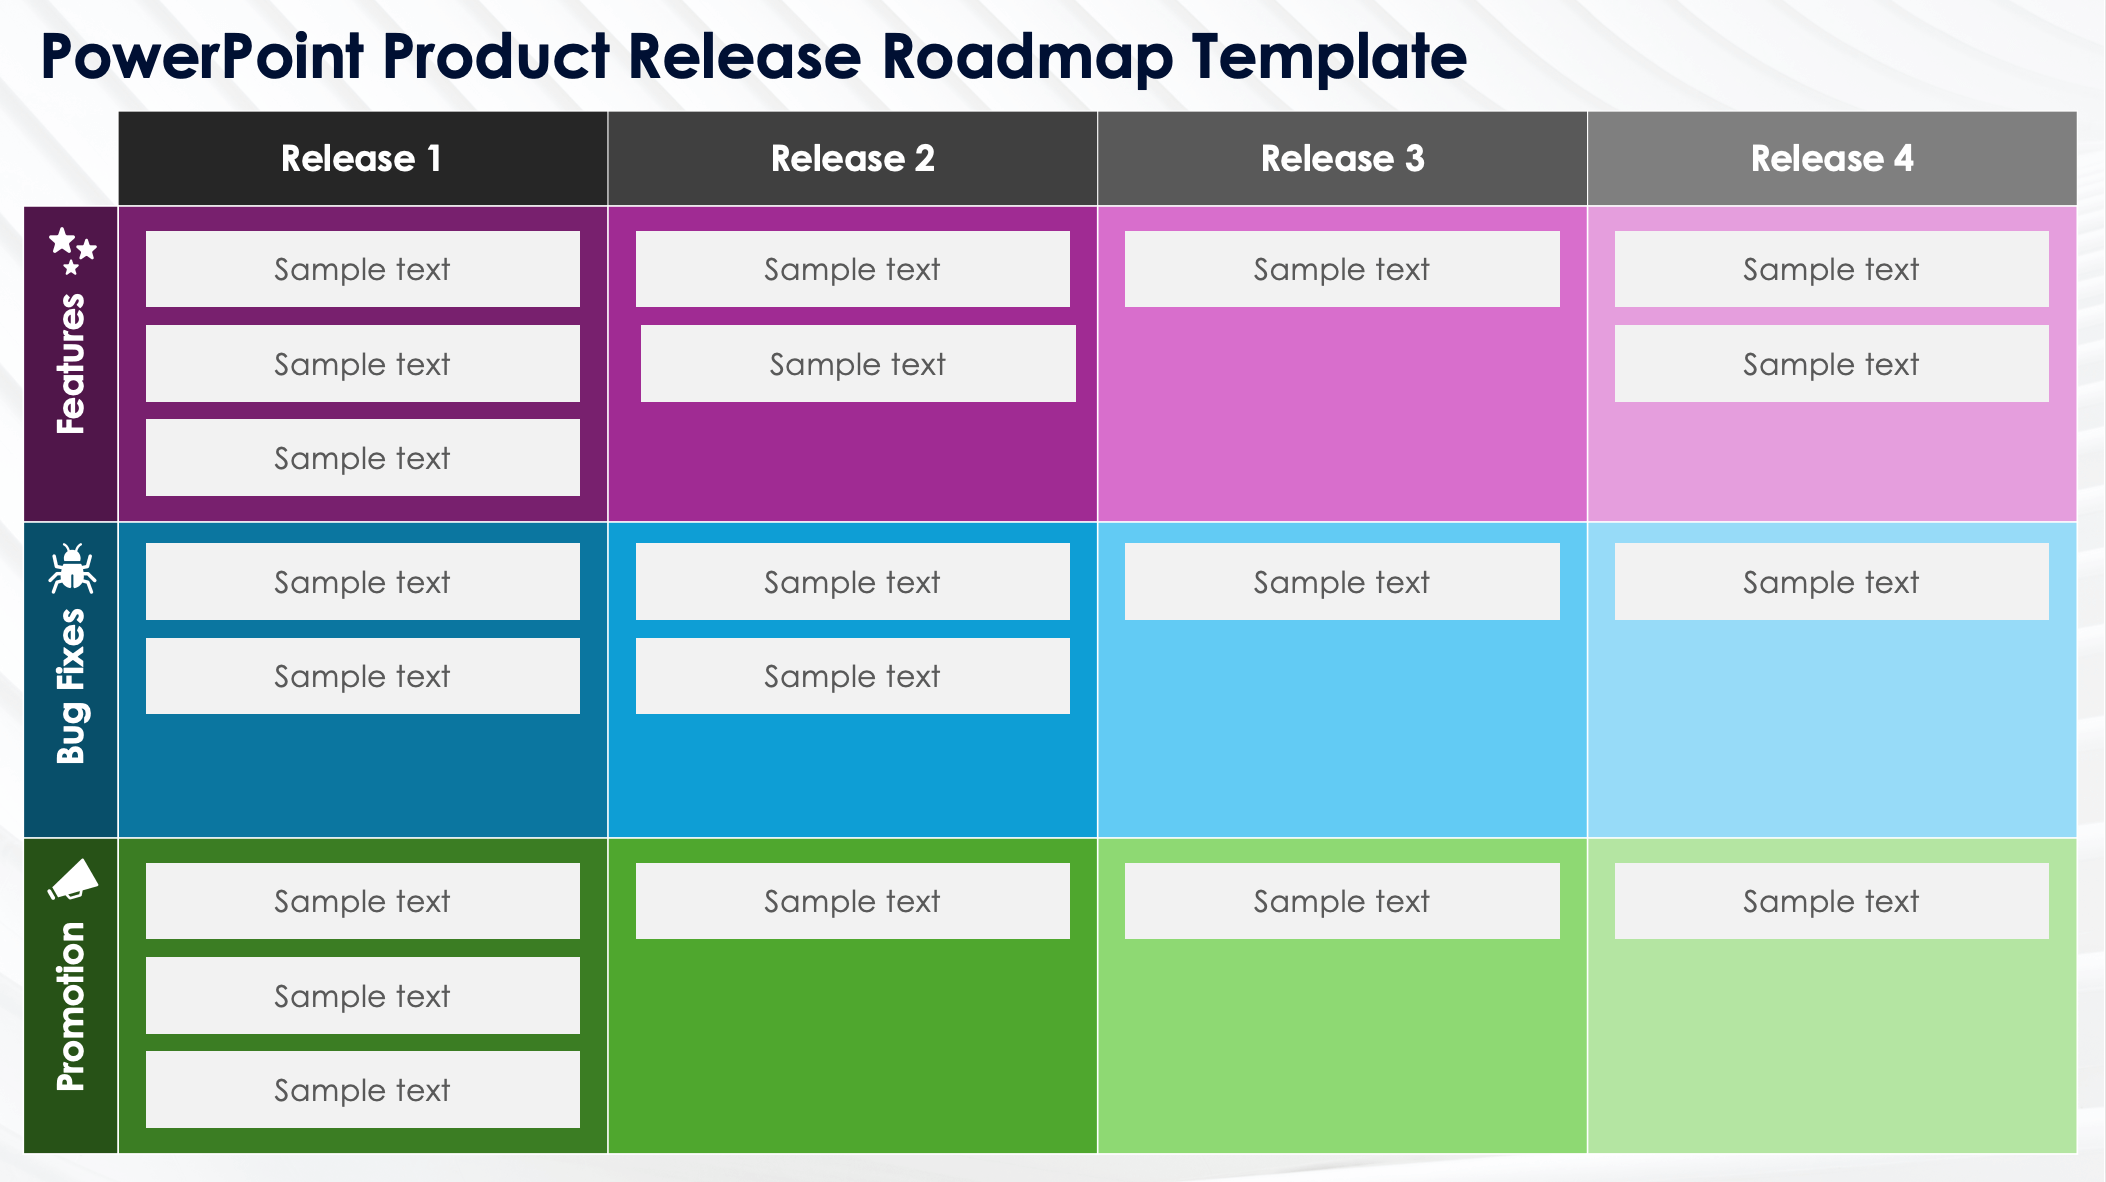 PowerPoint Product Release Roadmap Template